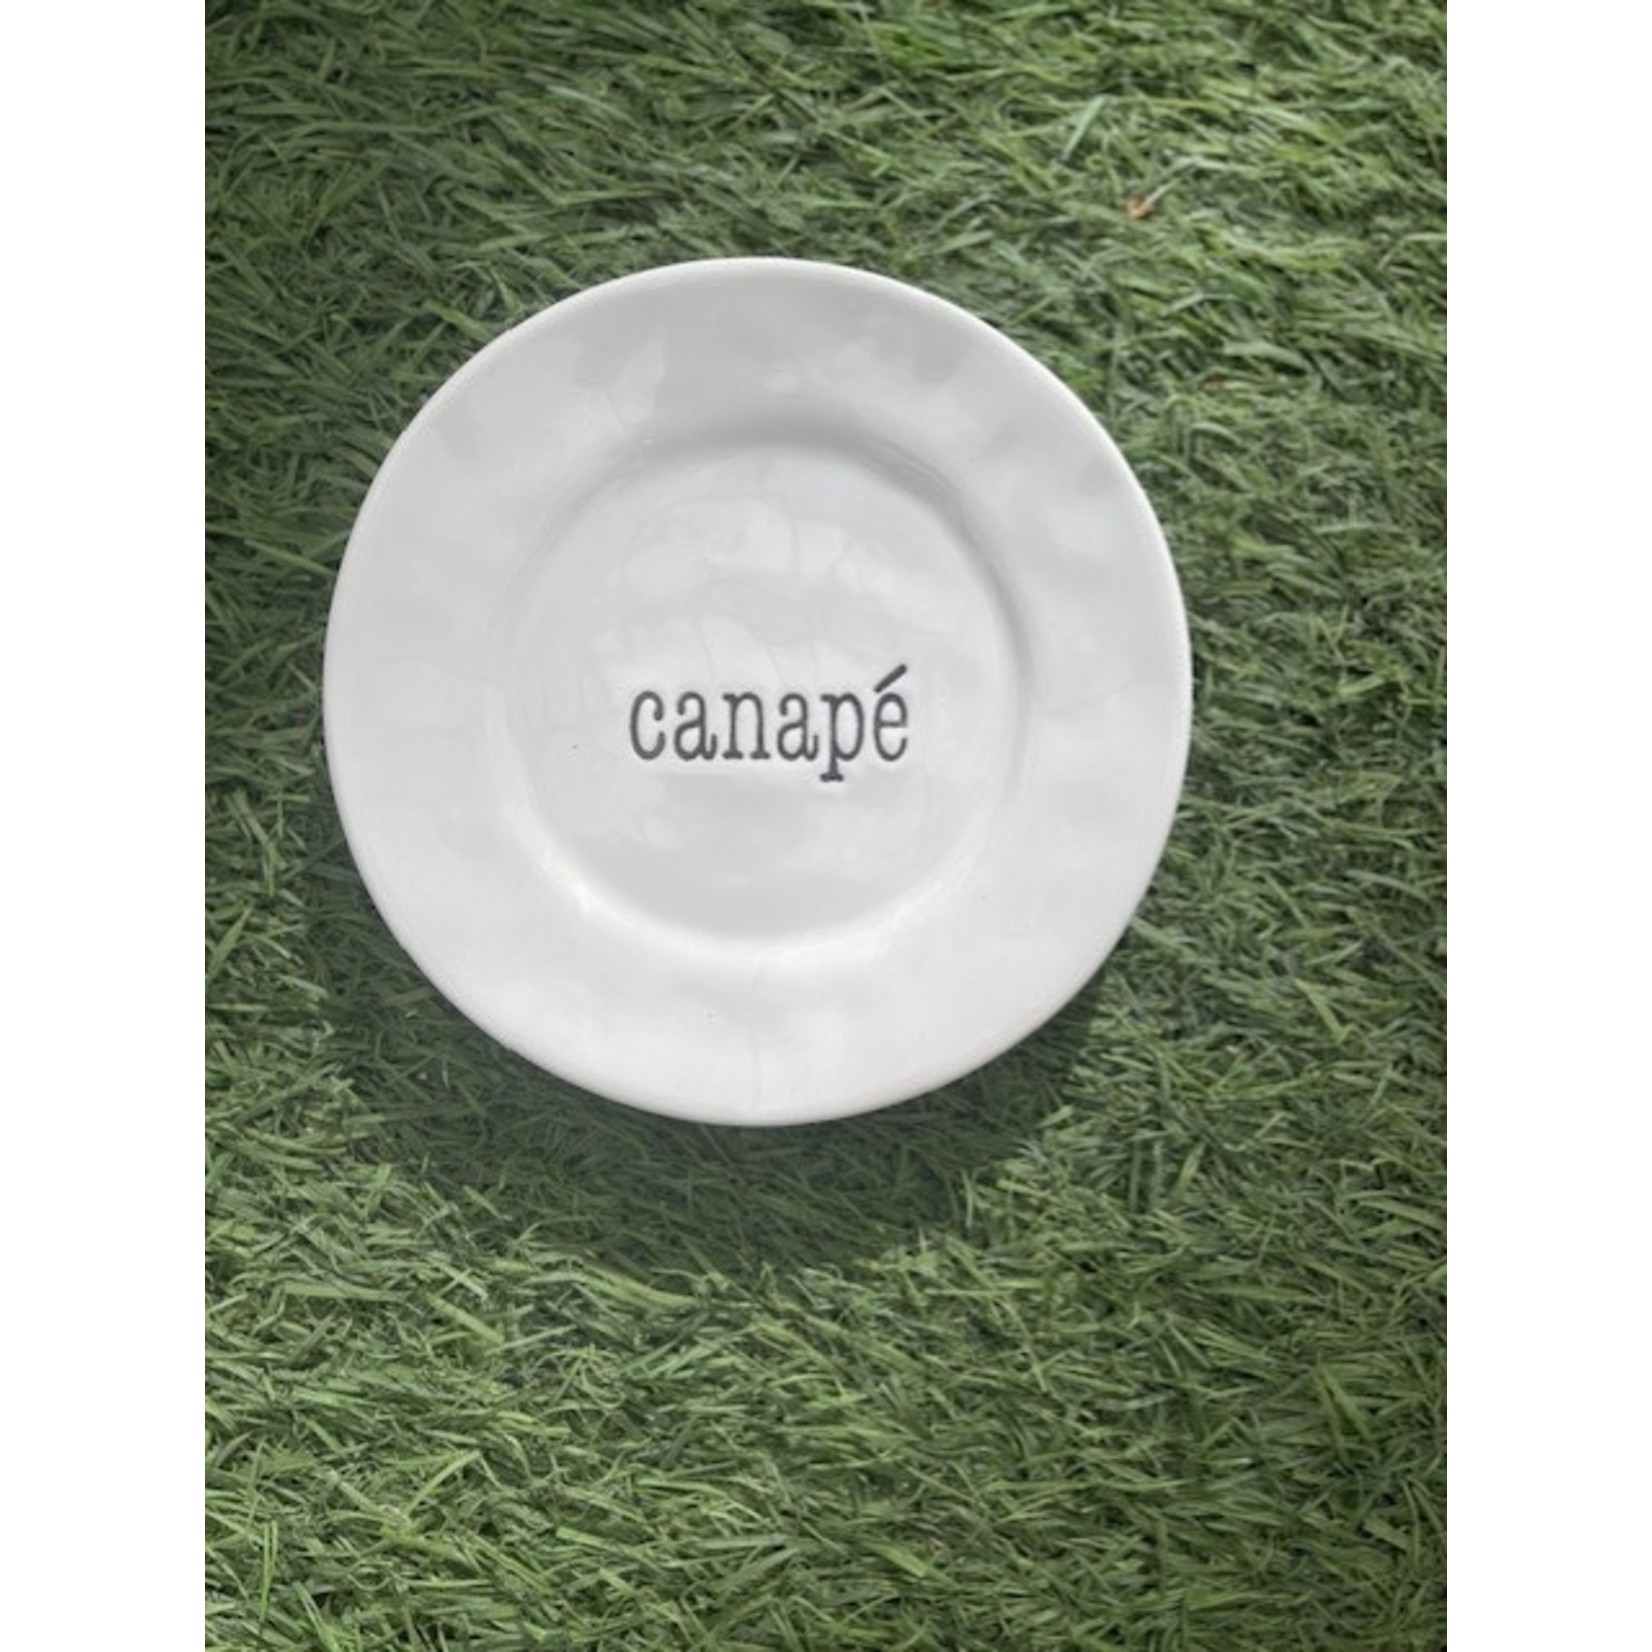 Its Just Words Canape Plates, 6in Asst